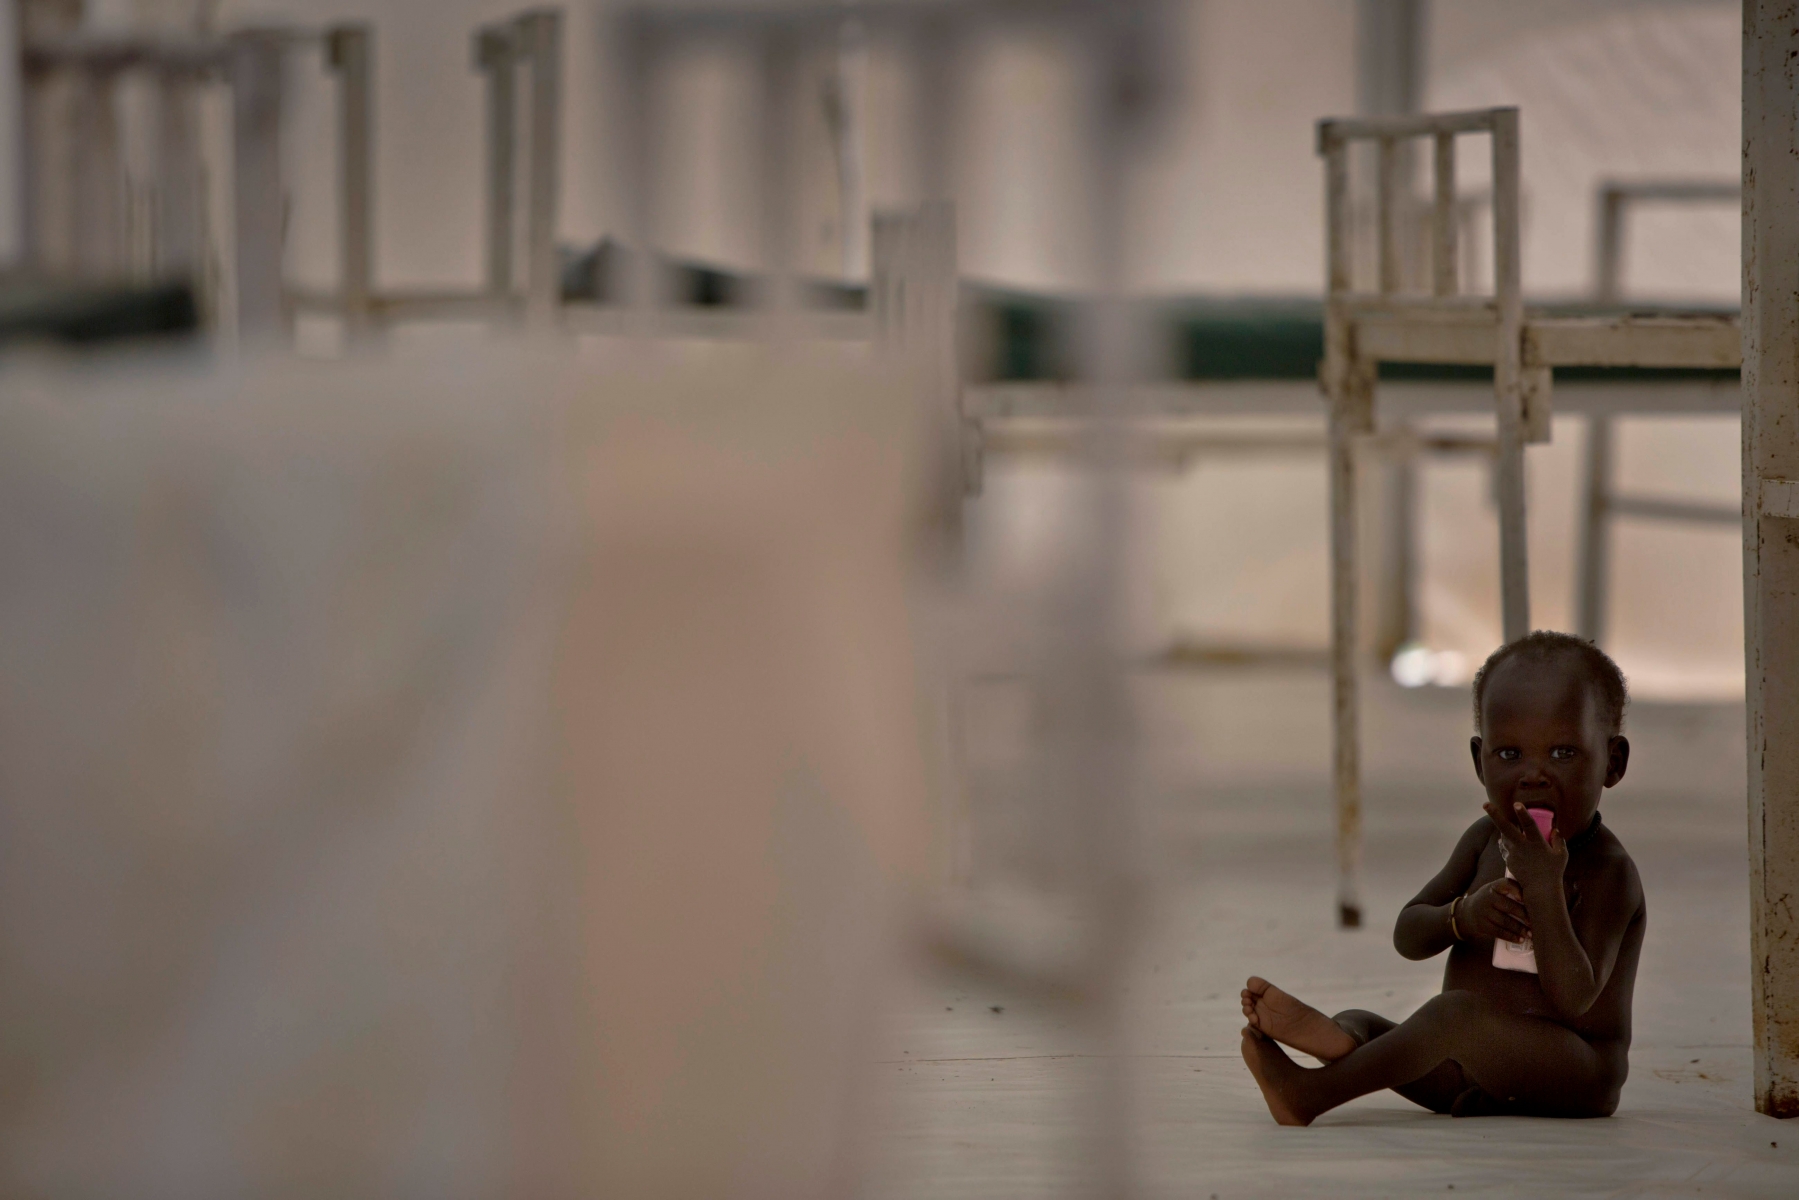 In this photo taken Sunday, Oct. 23, 2016 and released by UNICEF, a young child sits on the floor in the therapeutic feeding unit of the Medecins Sans Frontieres (Doctors Without Borders) hospital in the UN Protection of Civilians Camp in Bentiu, South Sudan. Famine has been declared Monday, Feb. 20, 2017 in two counties of South Sudan, according to an announcement by the South Sudan government and three U.N. agencies, which says the calamity is the result of prolonged civil war and an entrenched economic crisis that has devastated the war-torn East African nation. (Kate Holt/UNICEF via AP) South Sudan Famine